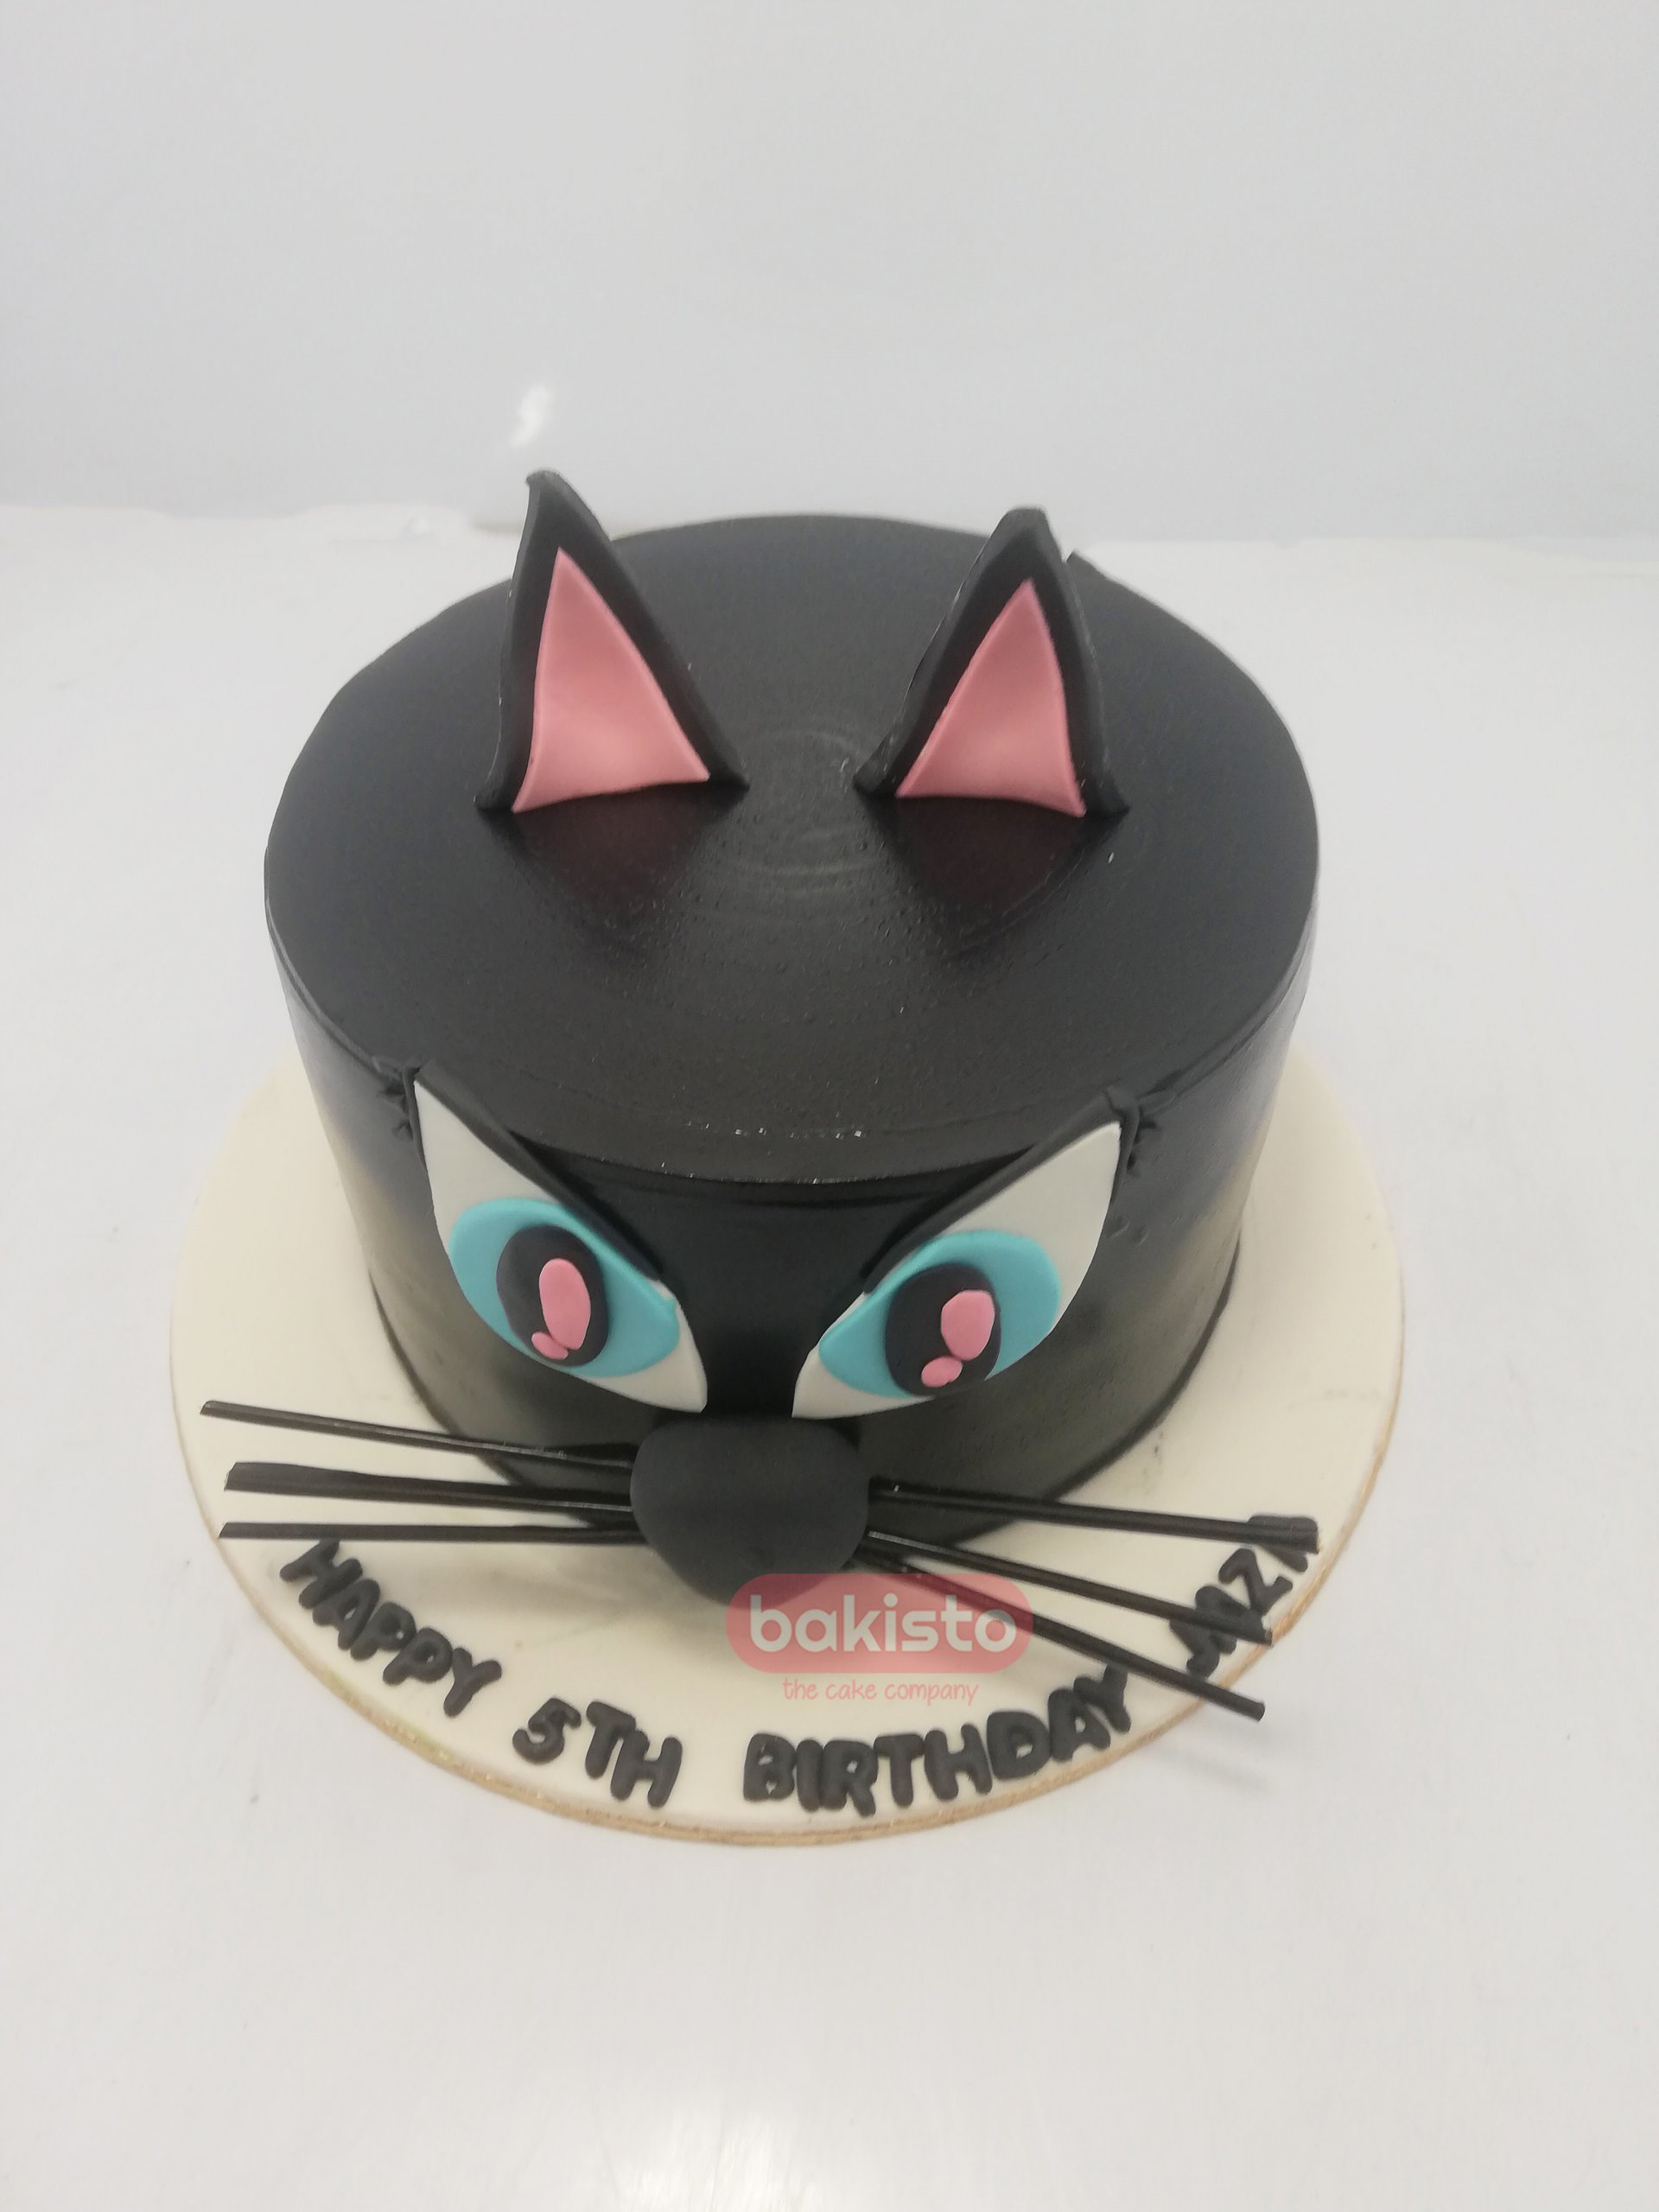 Adorable cat in a Party Hat Birthday Cake!